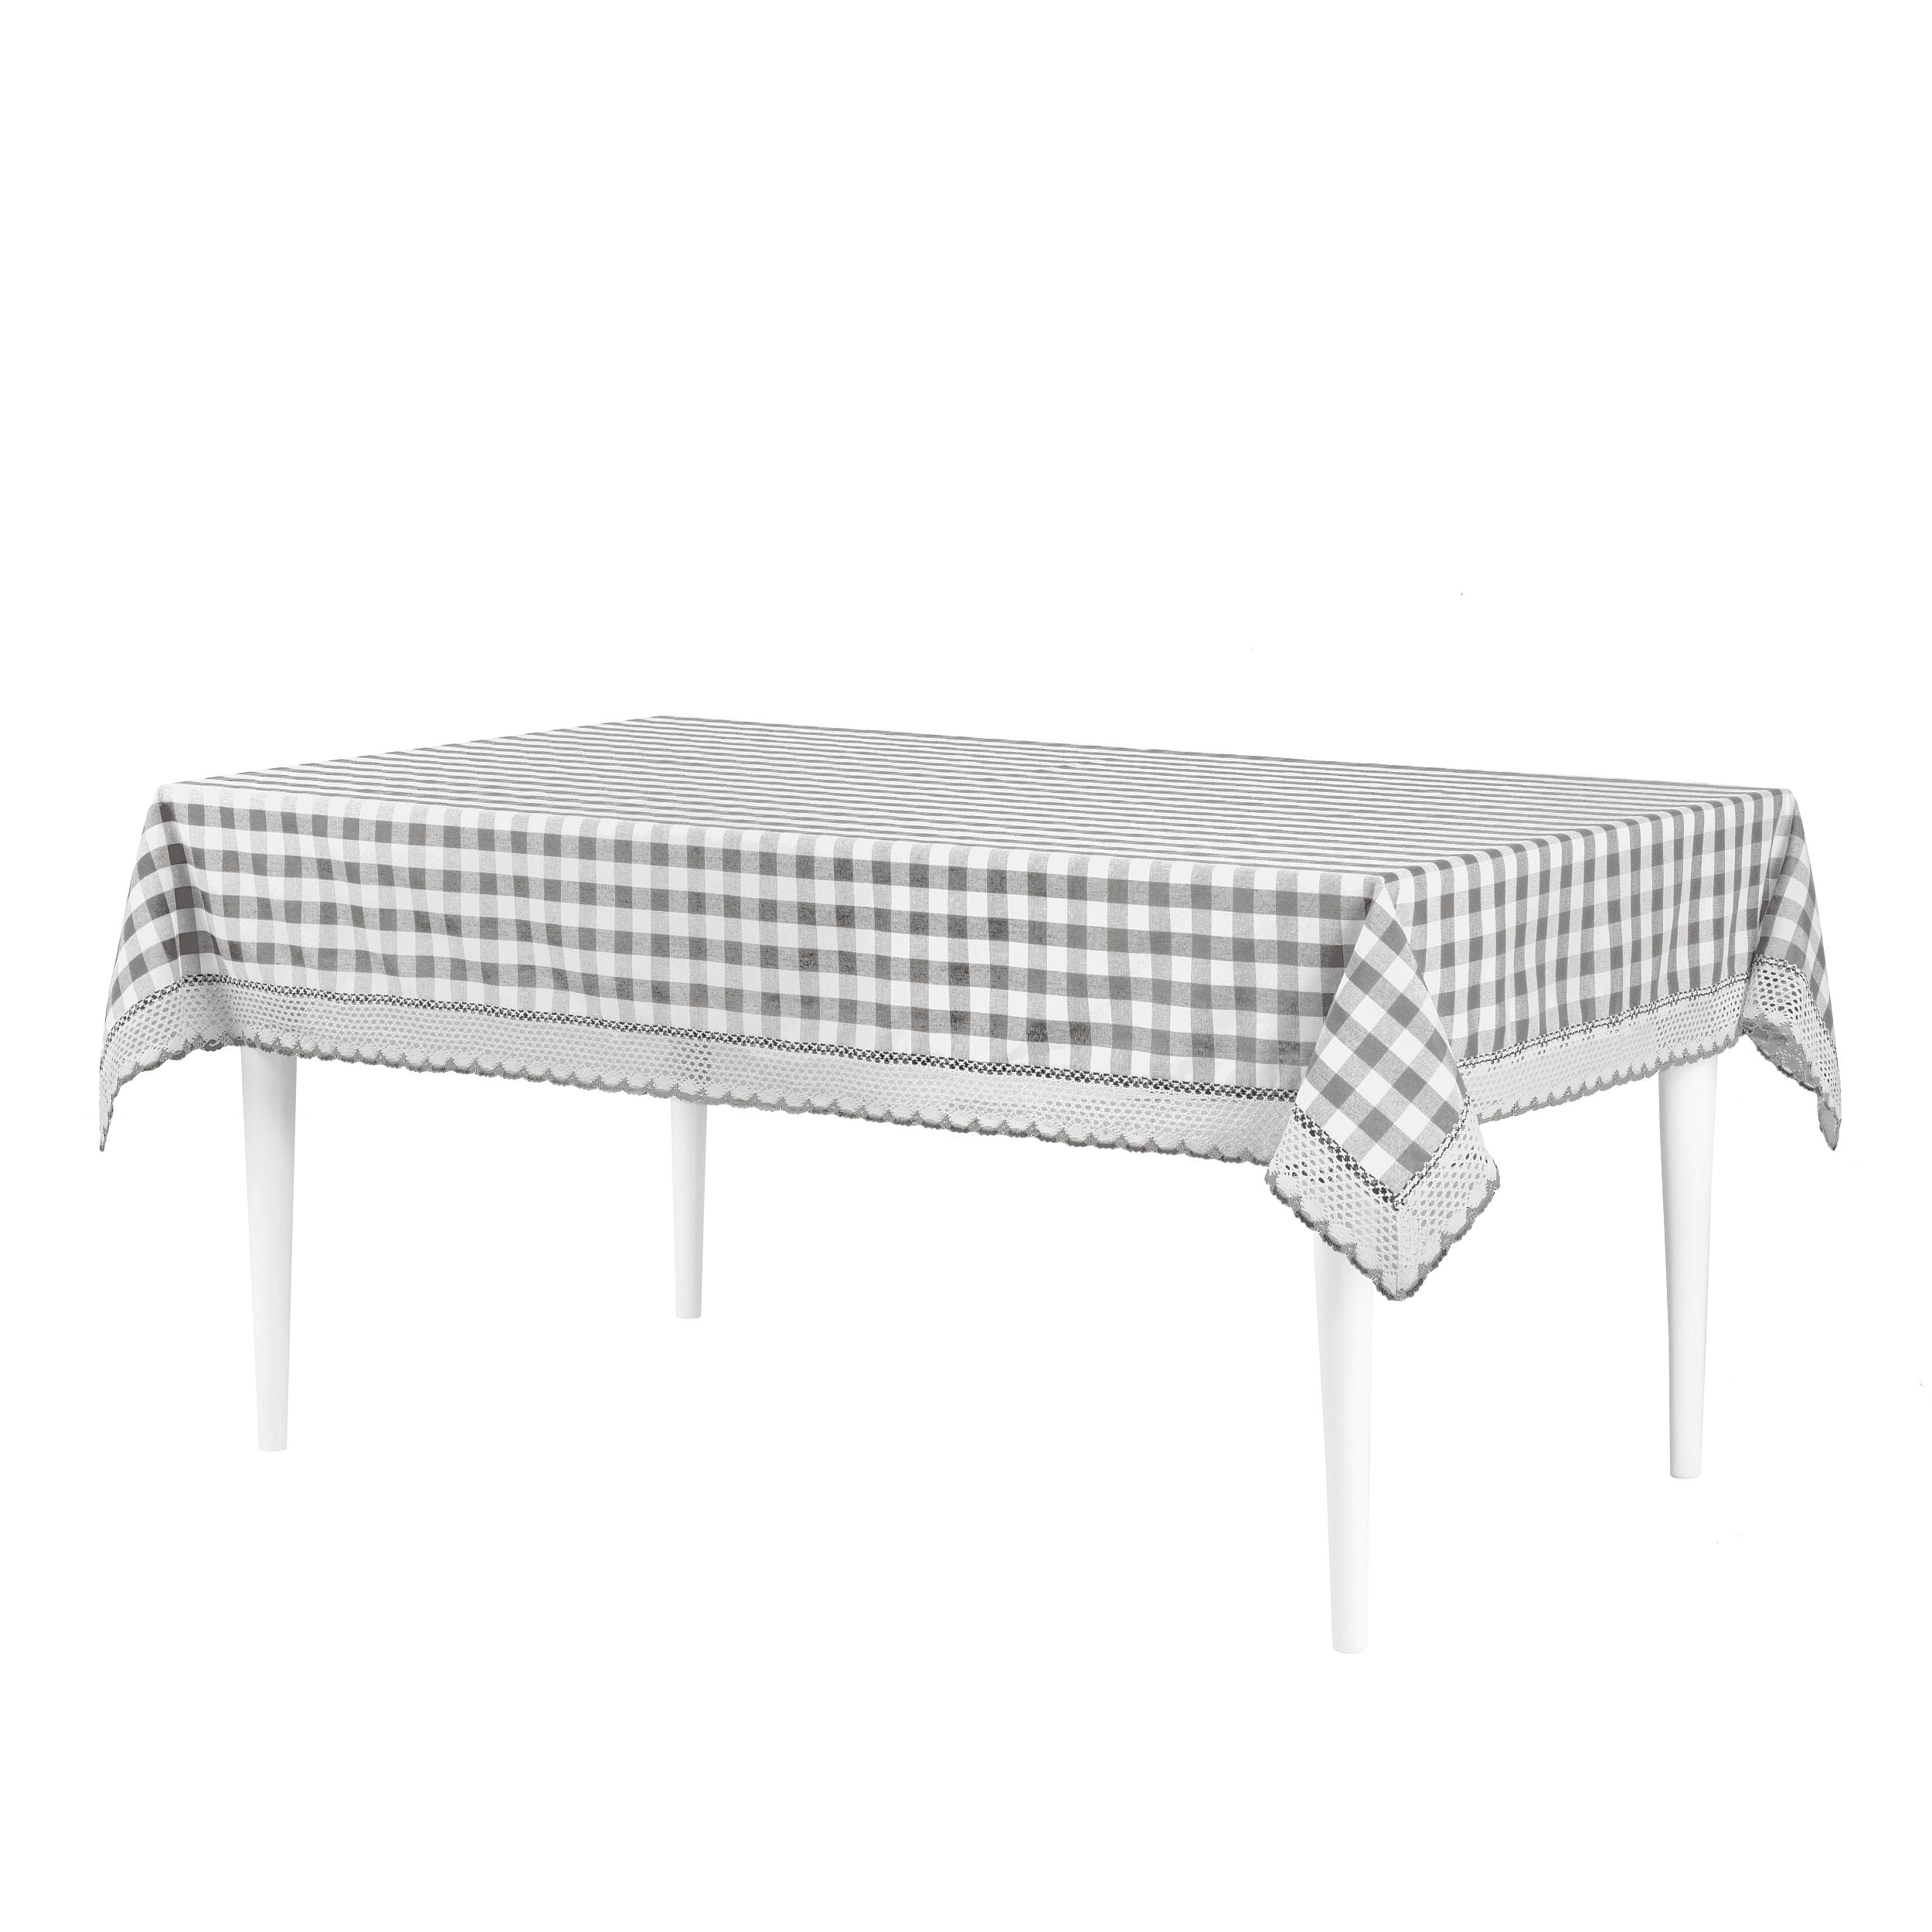 Picture of Achim BCTC84GY24 60 x 84 in. Buffalo Check Rectangle Tablecloth with Macram Trim, Grey